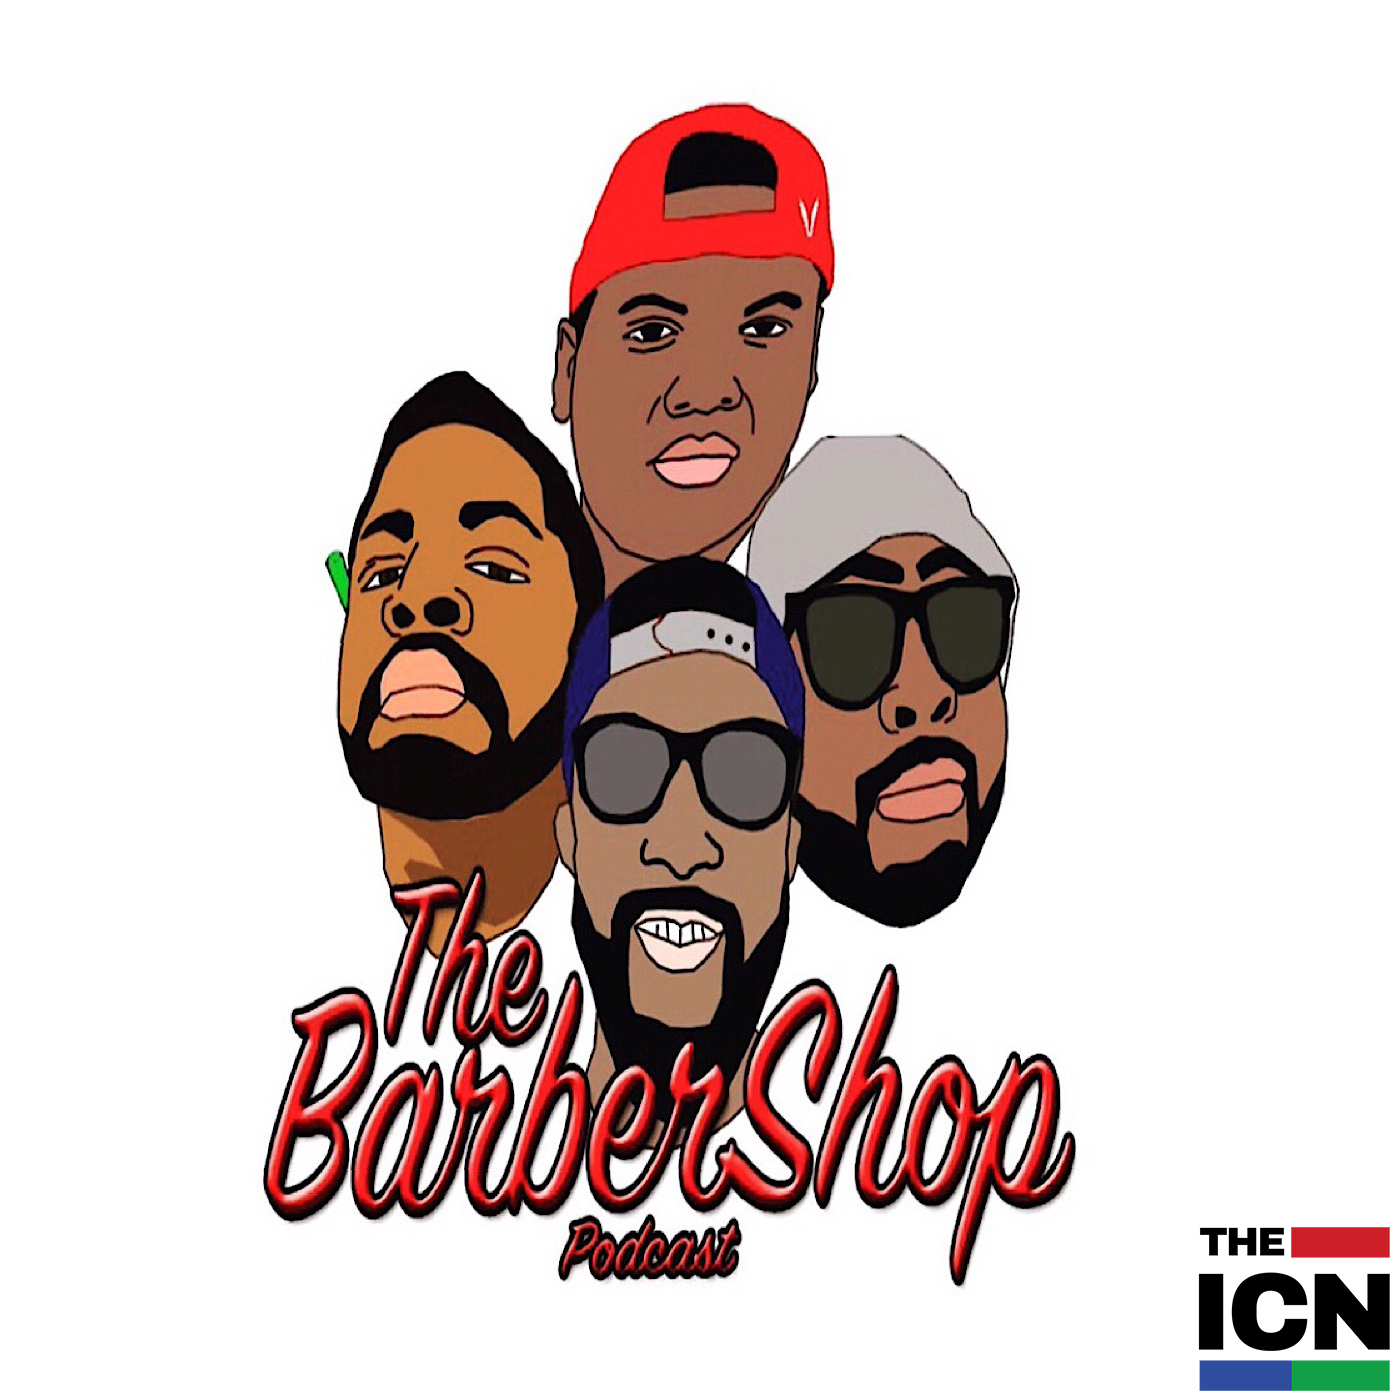 THE BARBERSHOP PODCAST